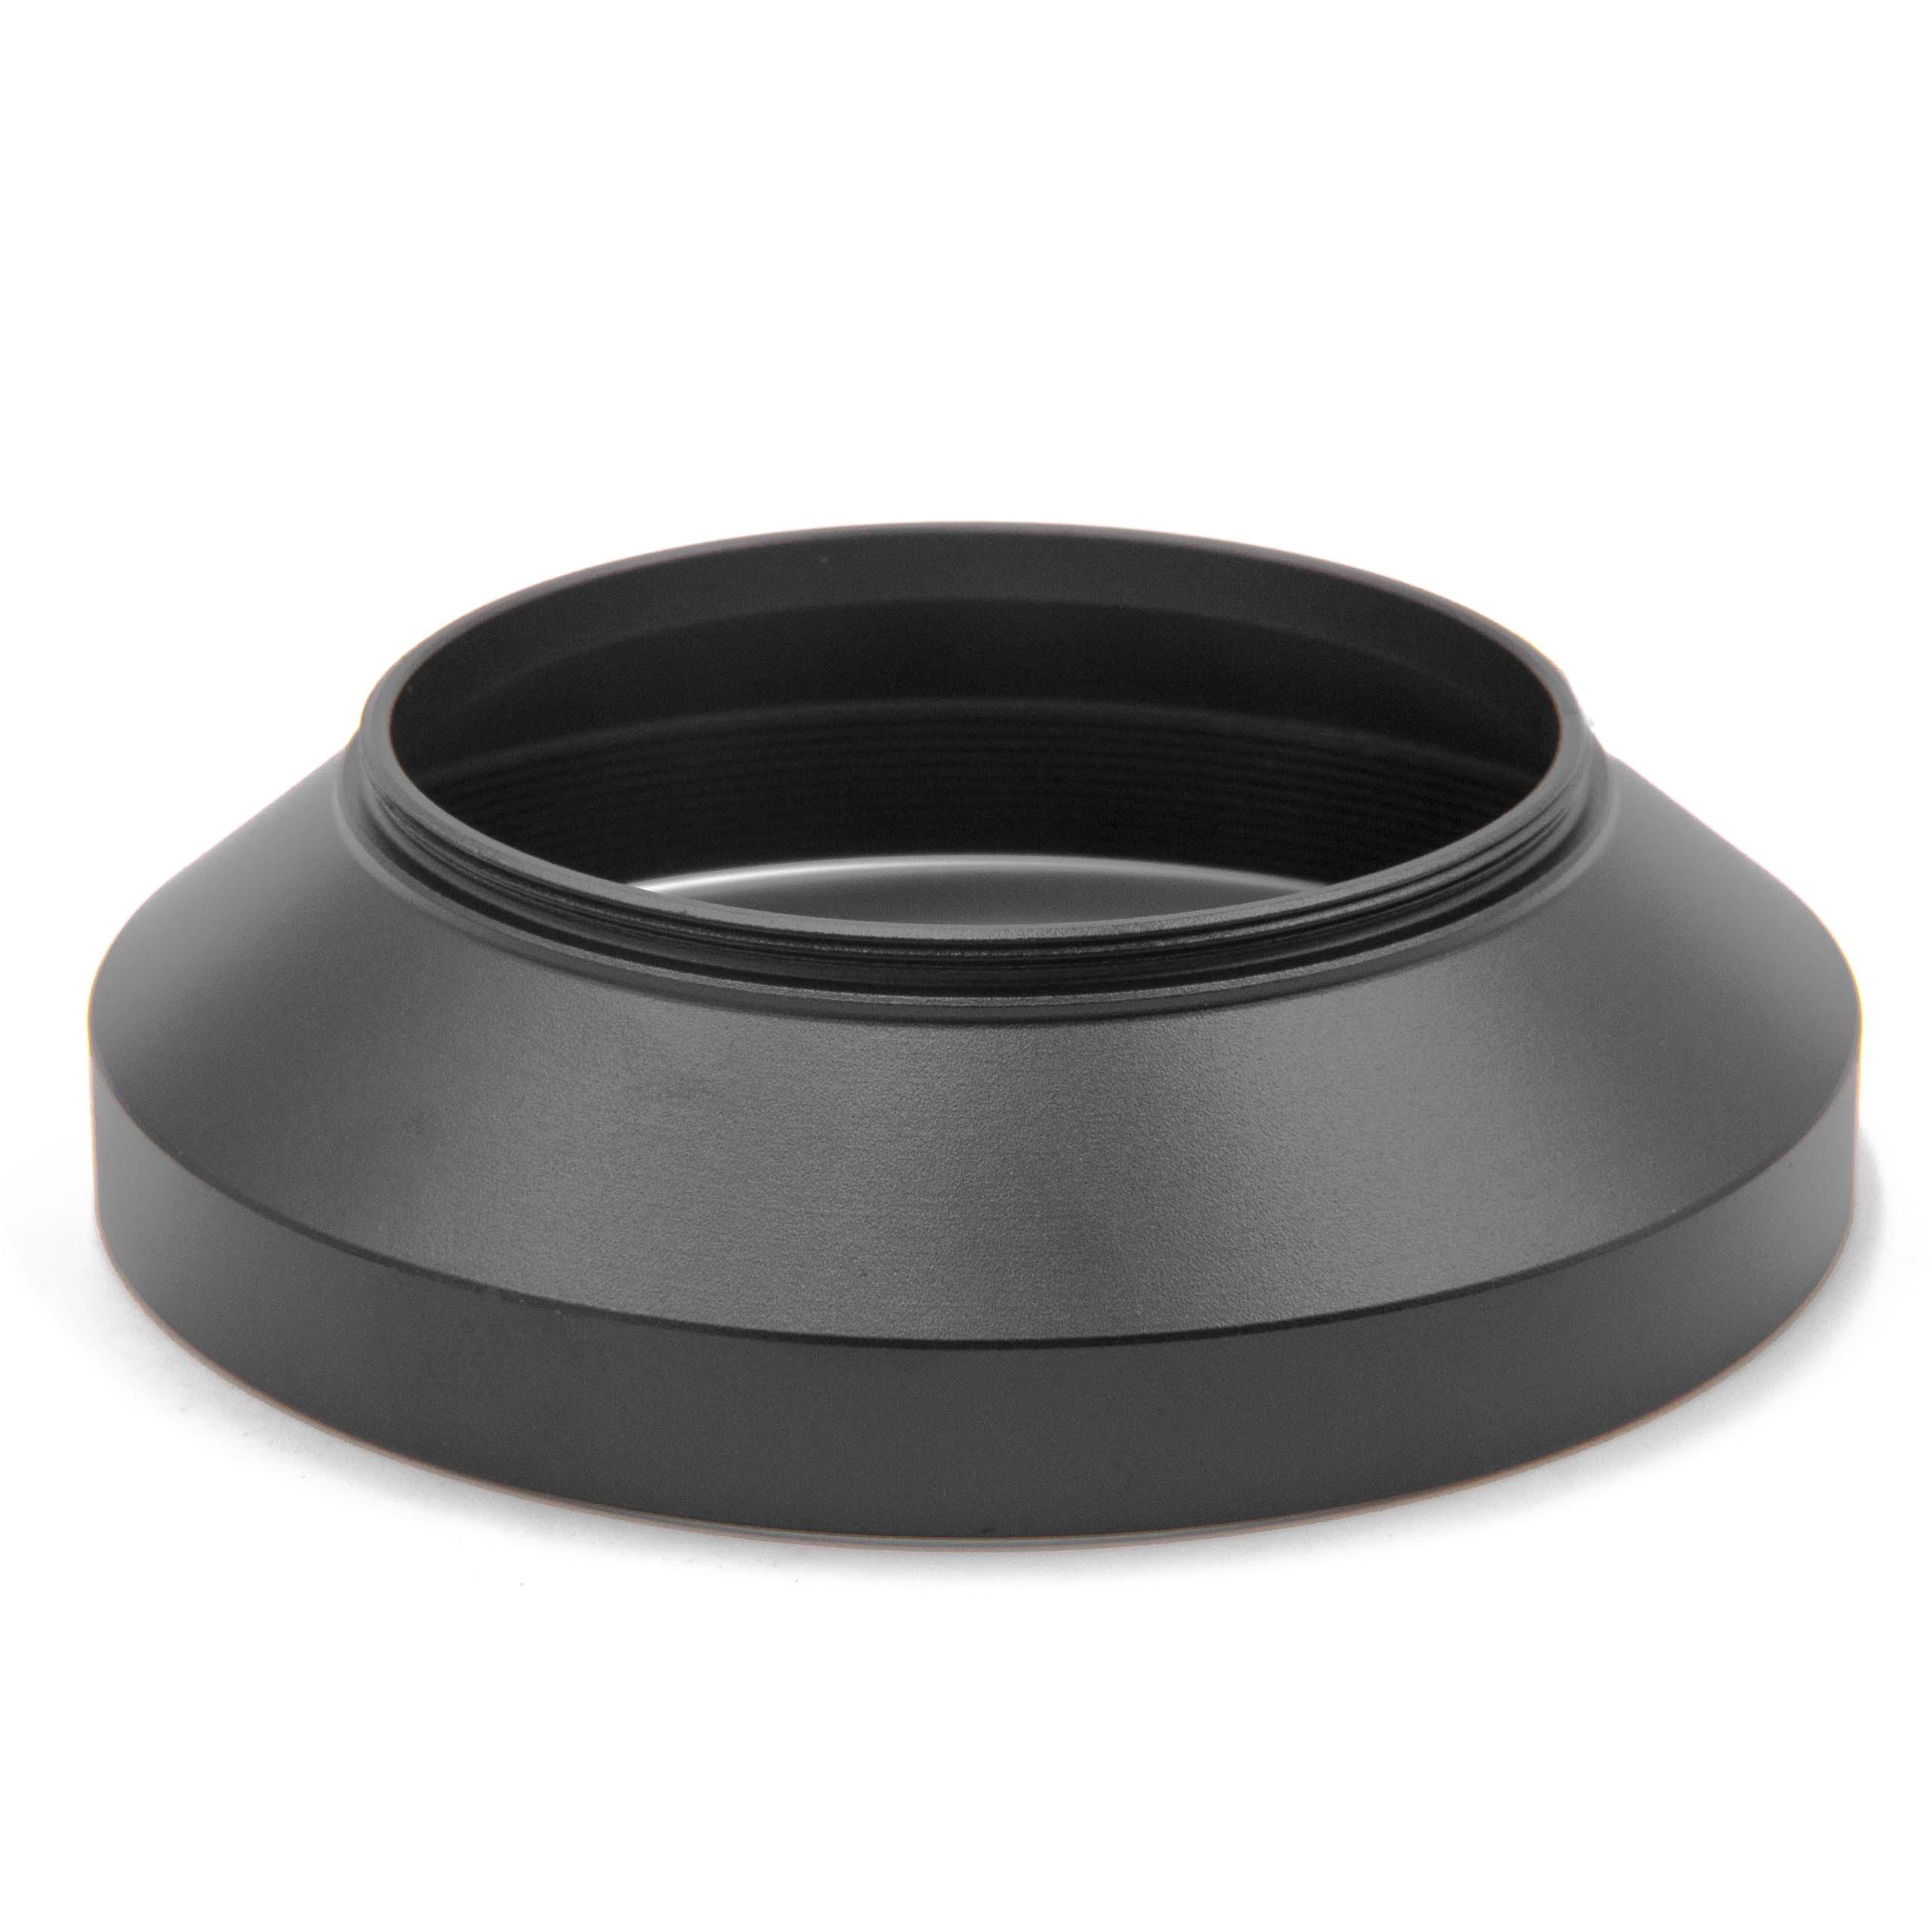 Lens Hood suitable for 55mm Lens - Wide-Angle Lens Shade Black, Round